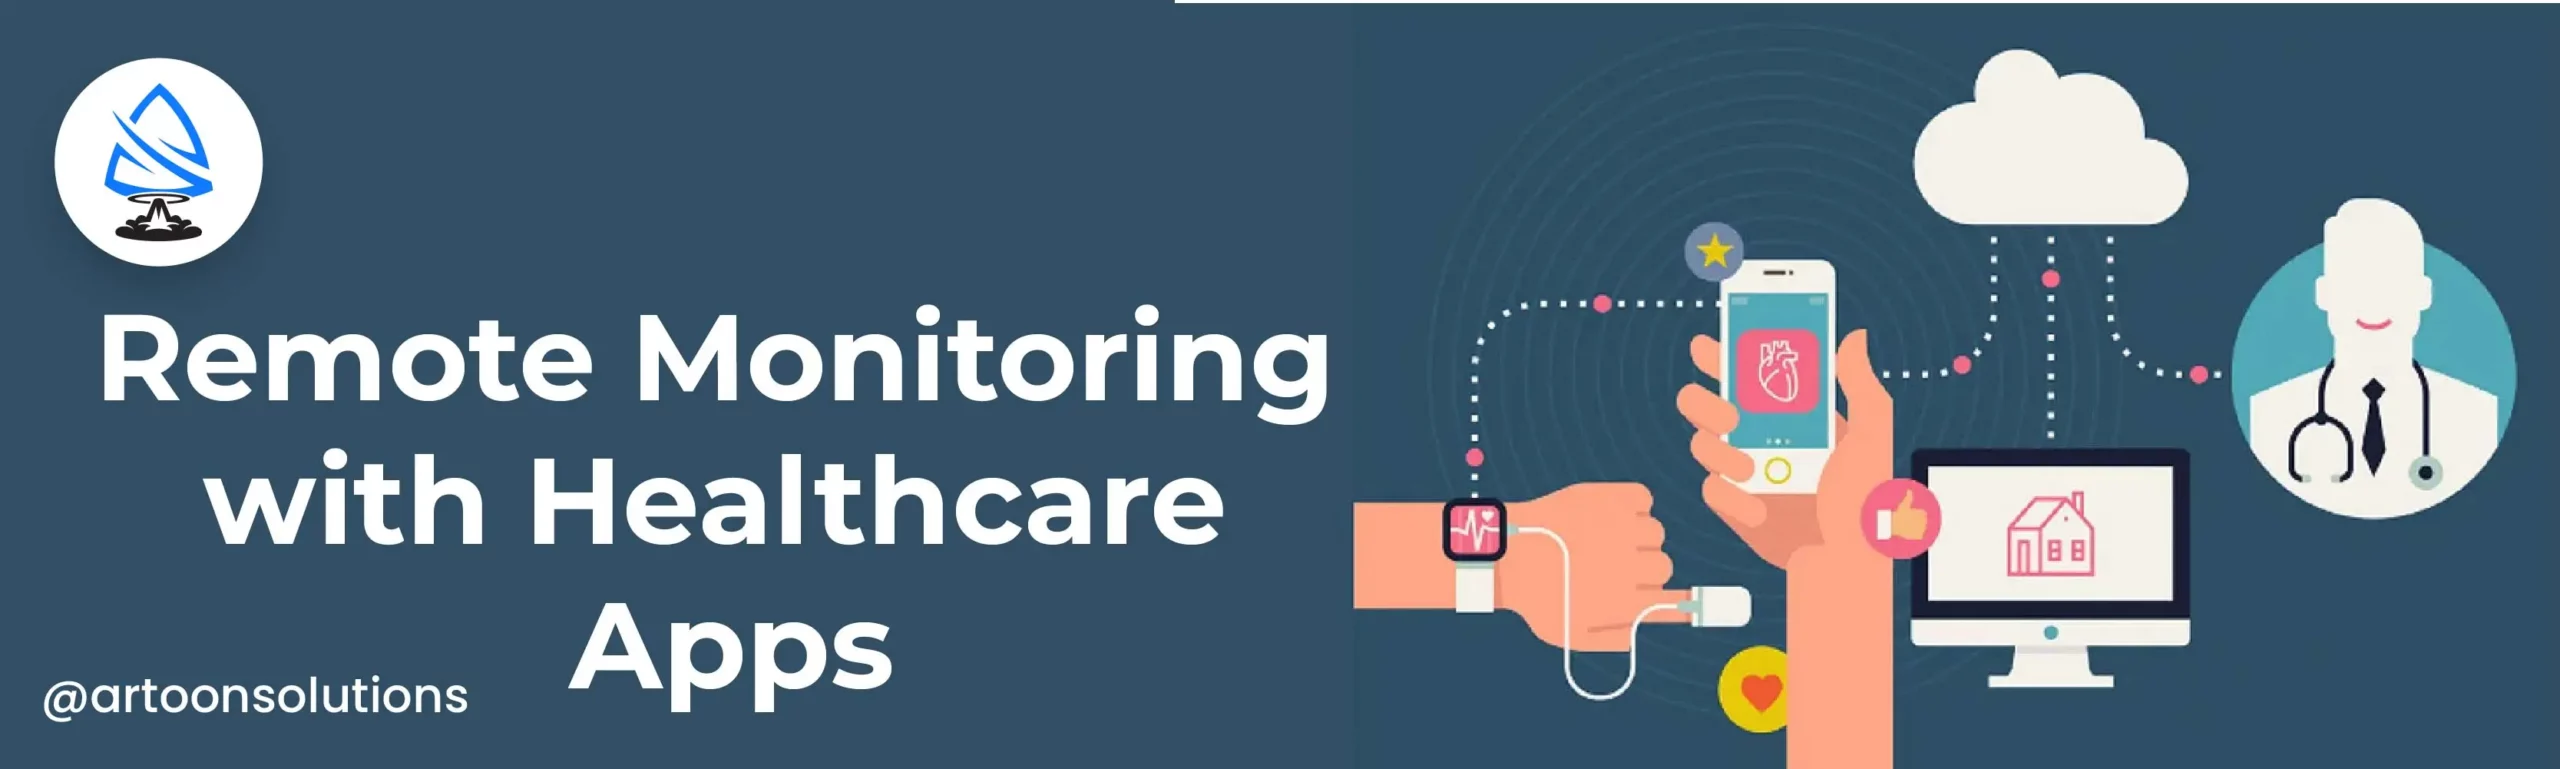 Remote Monitoring with Healthcare Apps